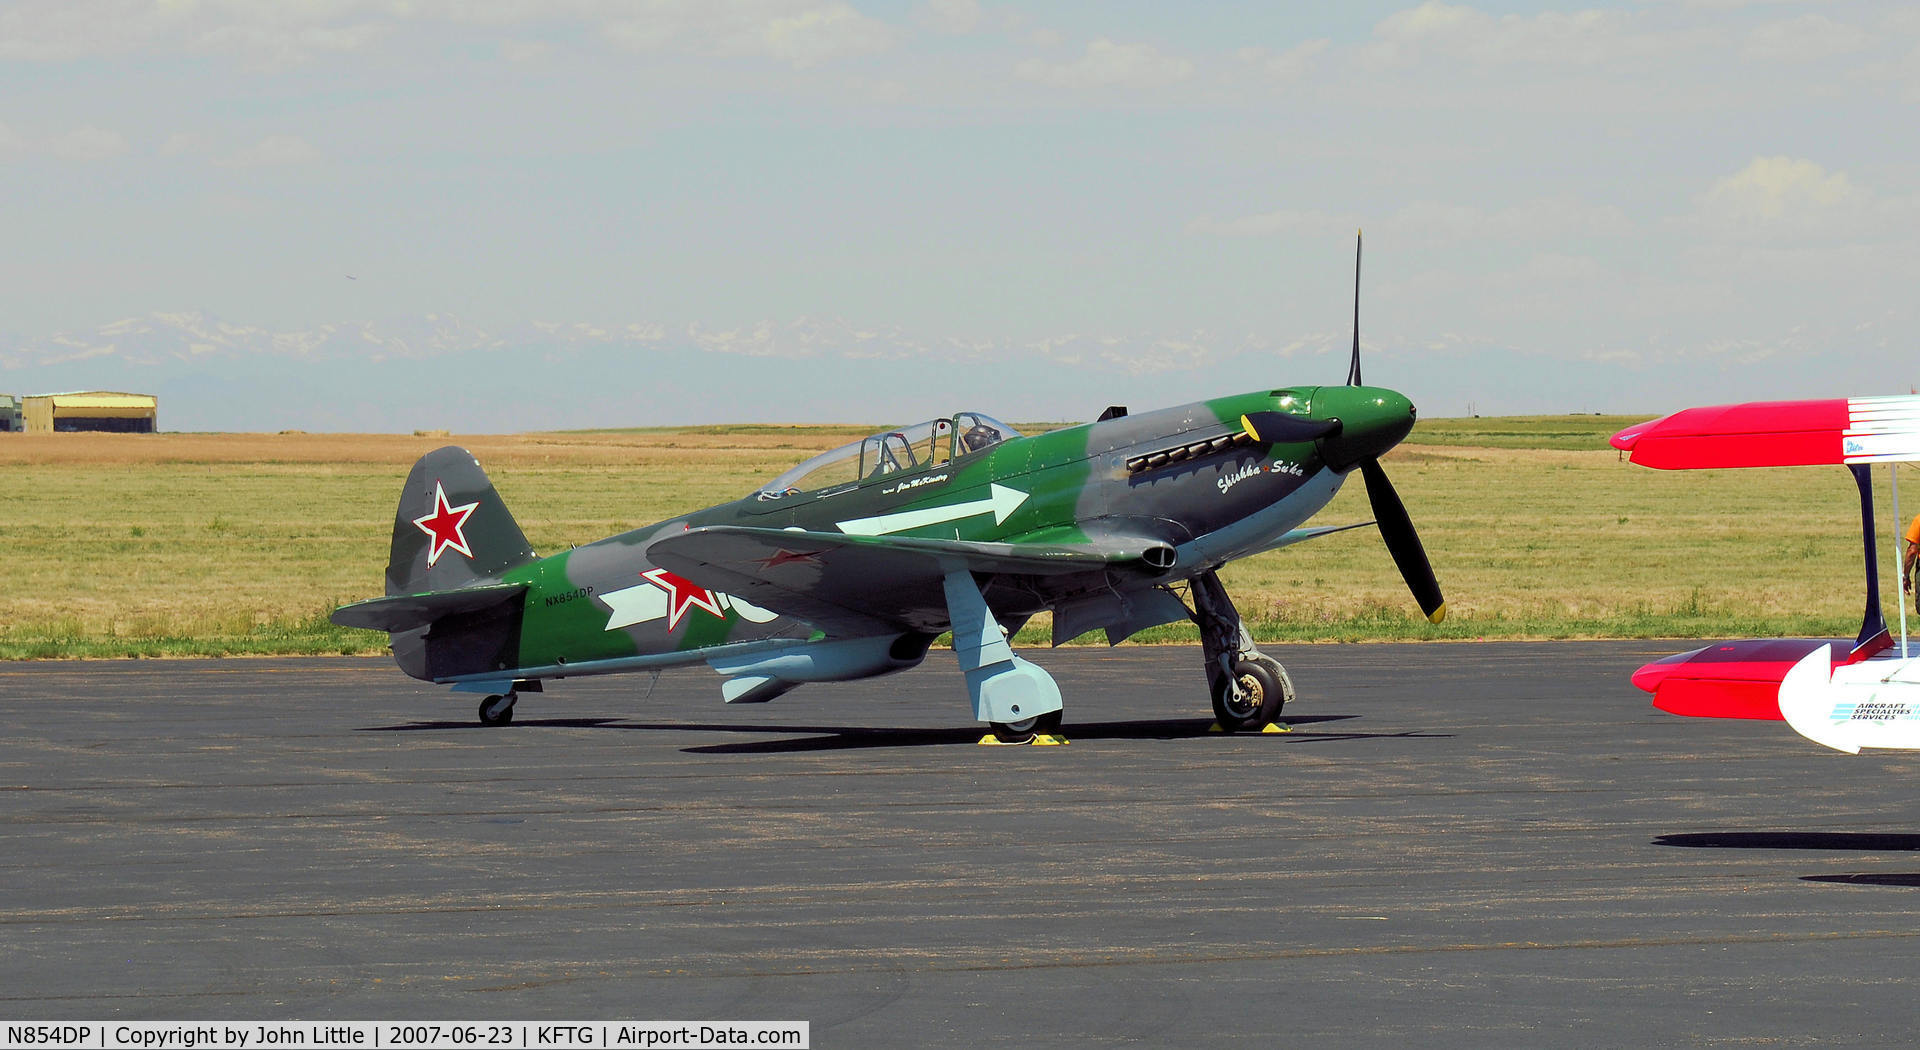 N854DP, 1994 Yakovlev Yak-3M C/N 0470101, Russian built aircraft taking some of the best features of the British and American aircraft of WWII -  EAA - Front Range